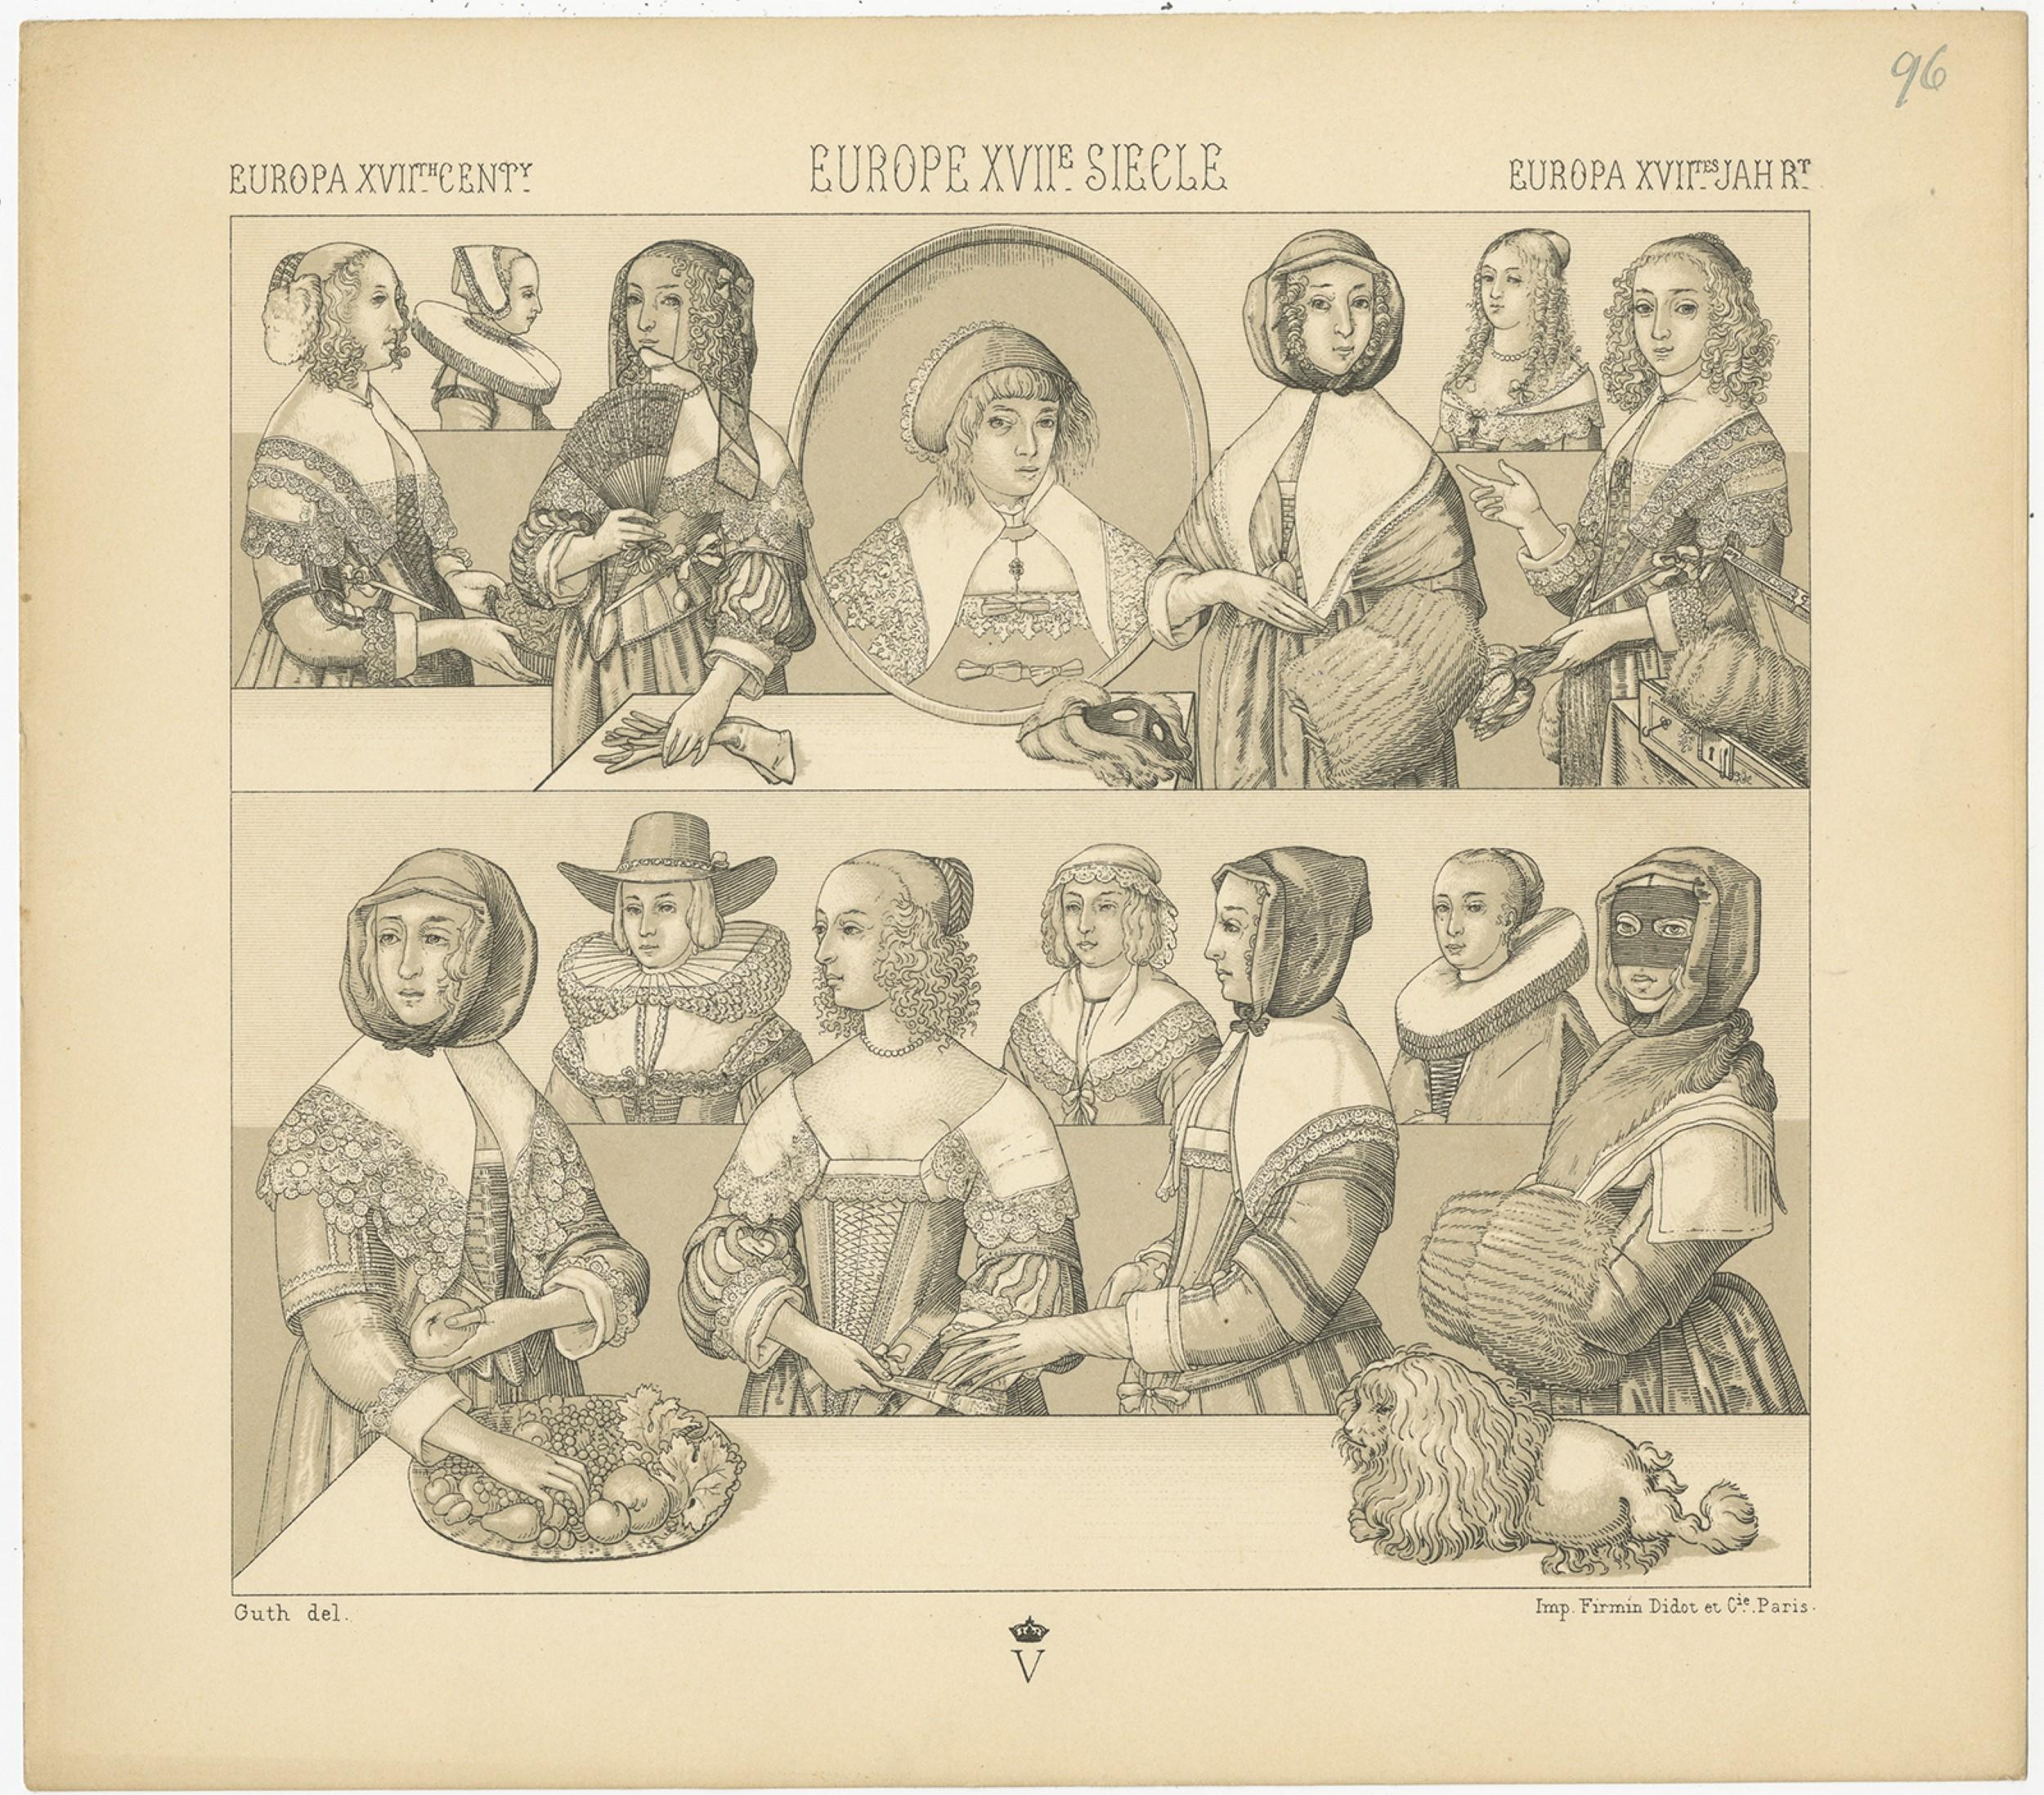 Antique print titled 'Europa XVIIth Cent - Europe XVIIe Siecle - Europa XVIItes Jahr'. Chromolithograph of European 17th century costumes. This print originates from 'Le Costume Historique' by M.A. Racinet. Published, circa 1880.